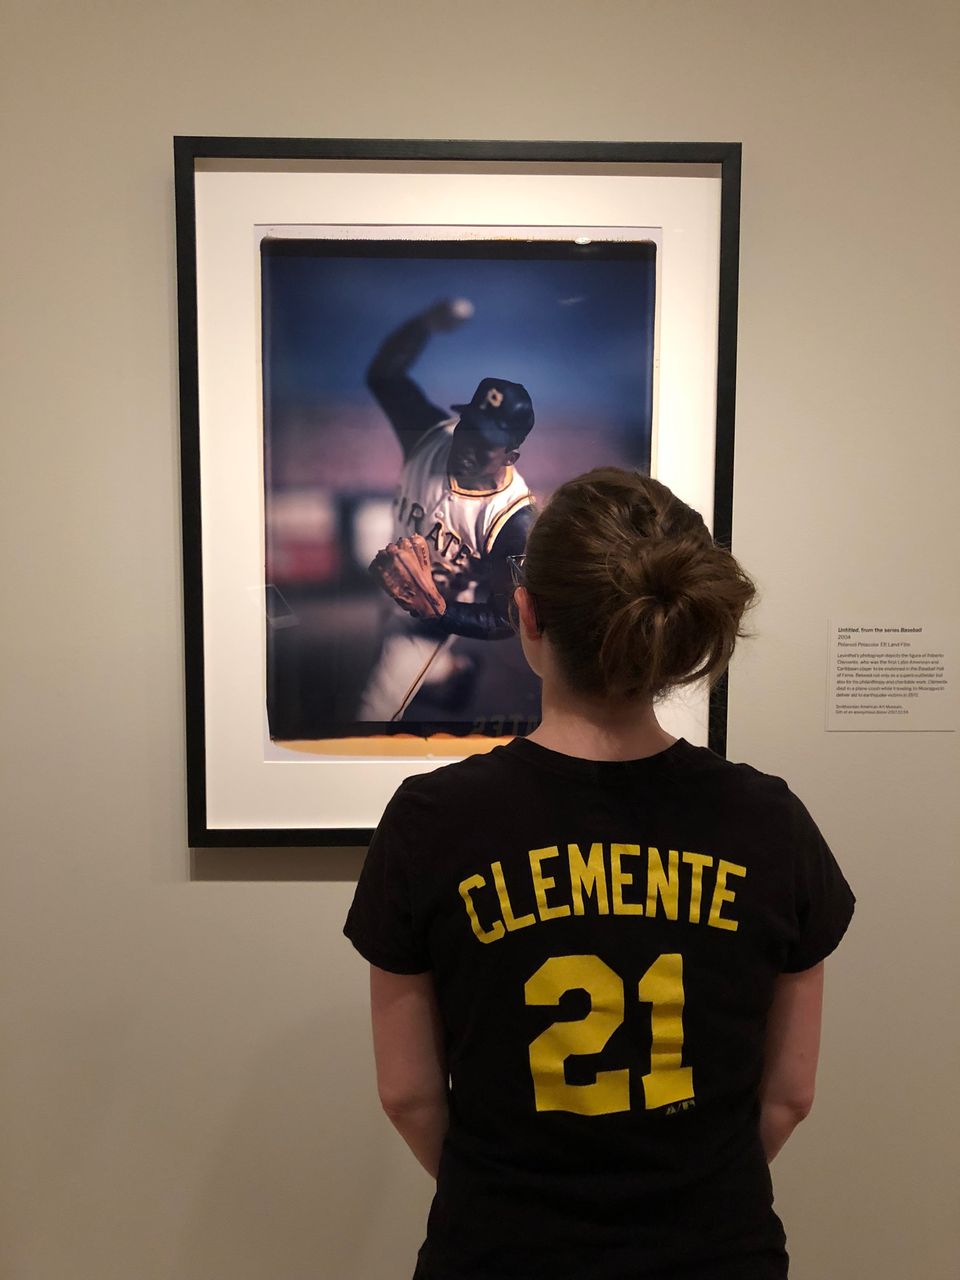 Blog author in front of the David Levinthal image of Roberto Clemente